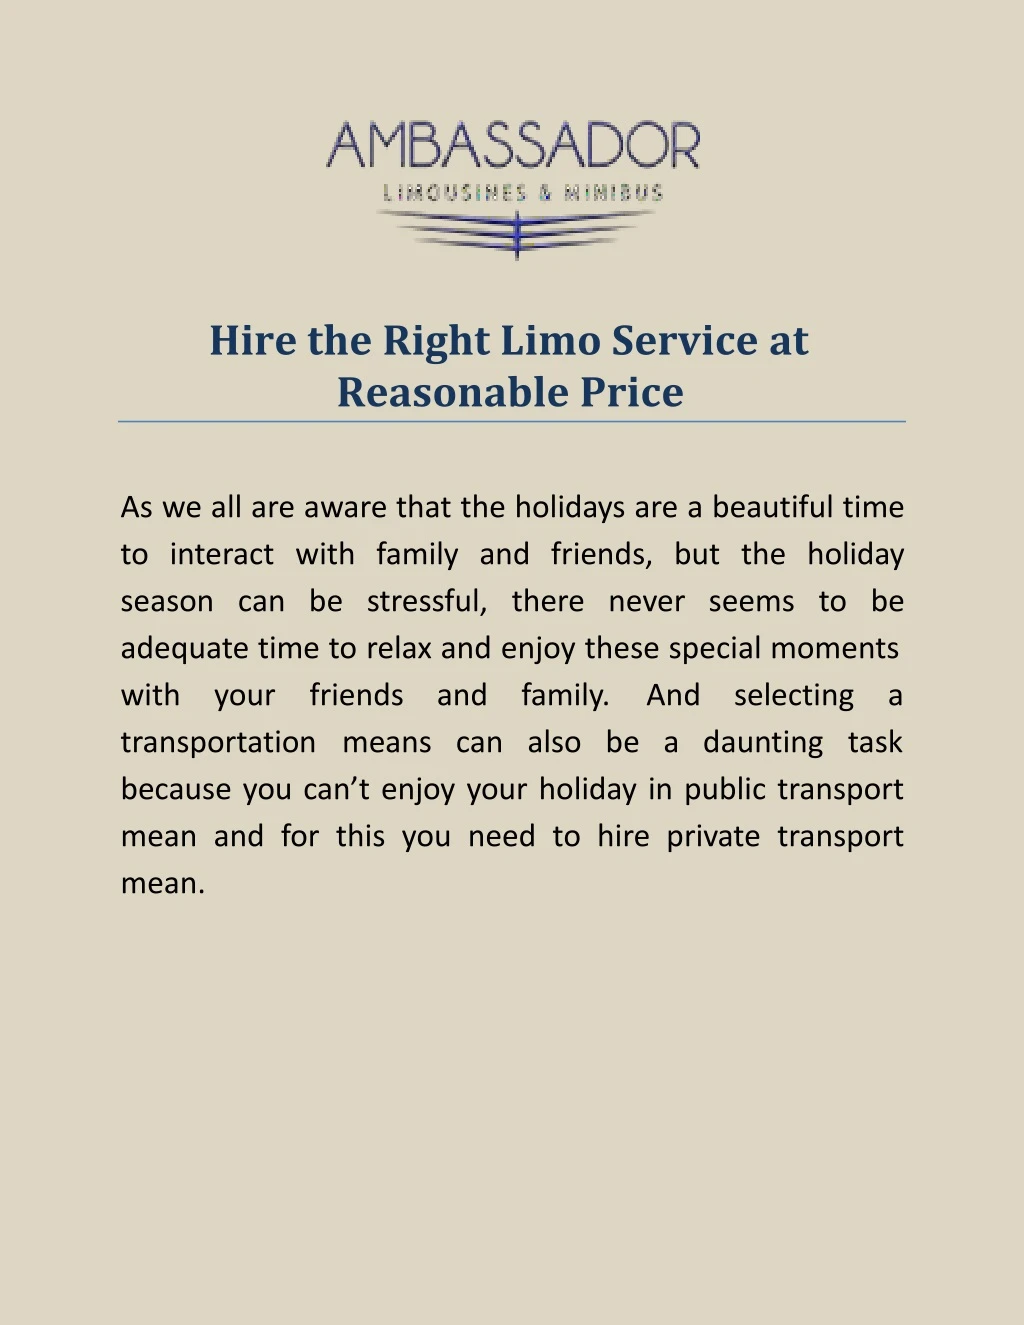 hire the right limo service at reasonable price